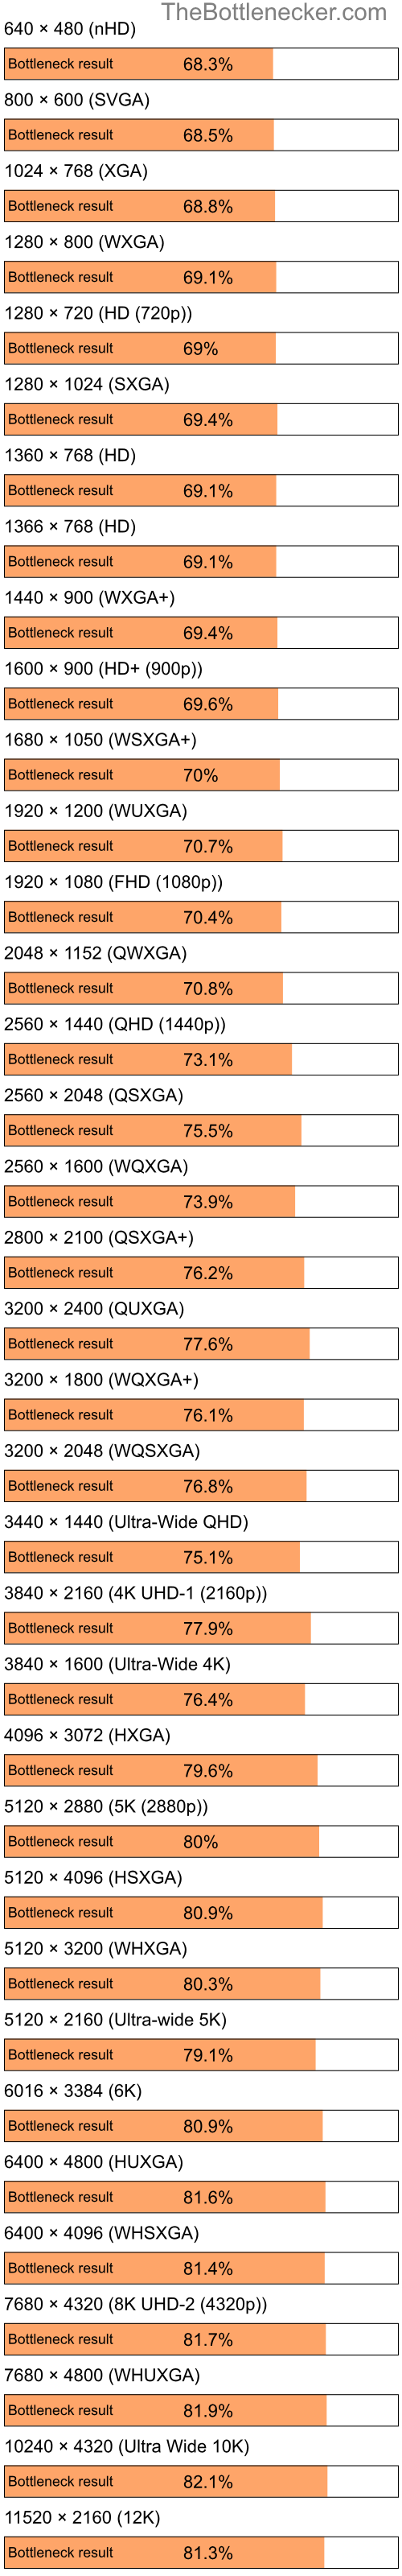 Bottleneck results by resolution for Intel Pentium 4 and NVIDIA GeForce 9200M GS in Graphic Card Intense Tasks